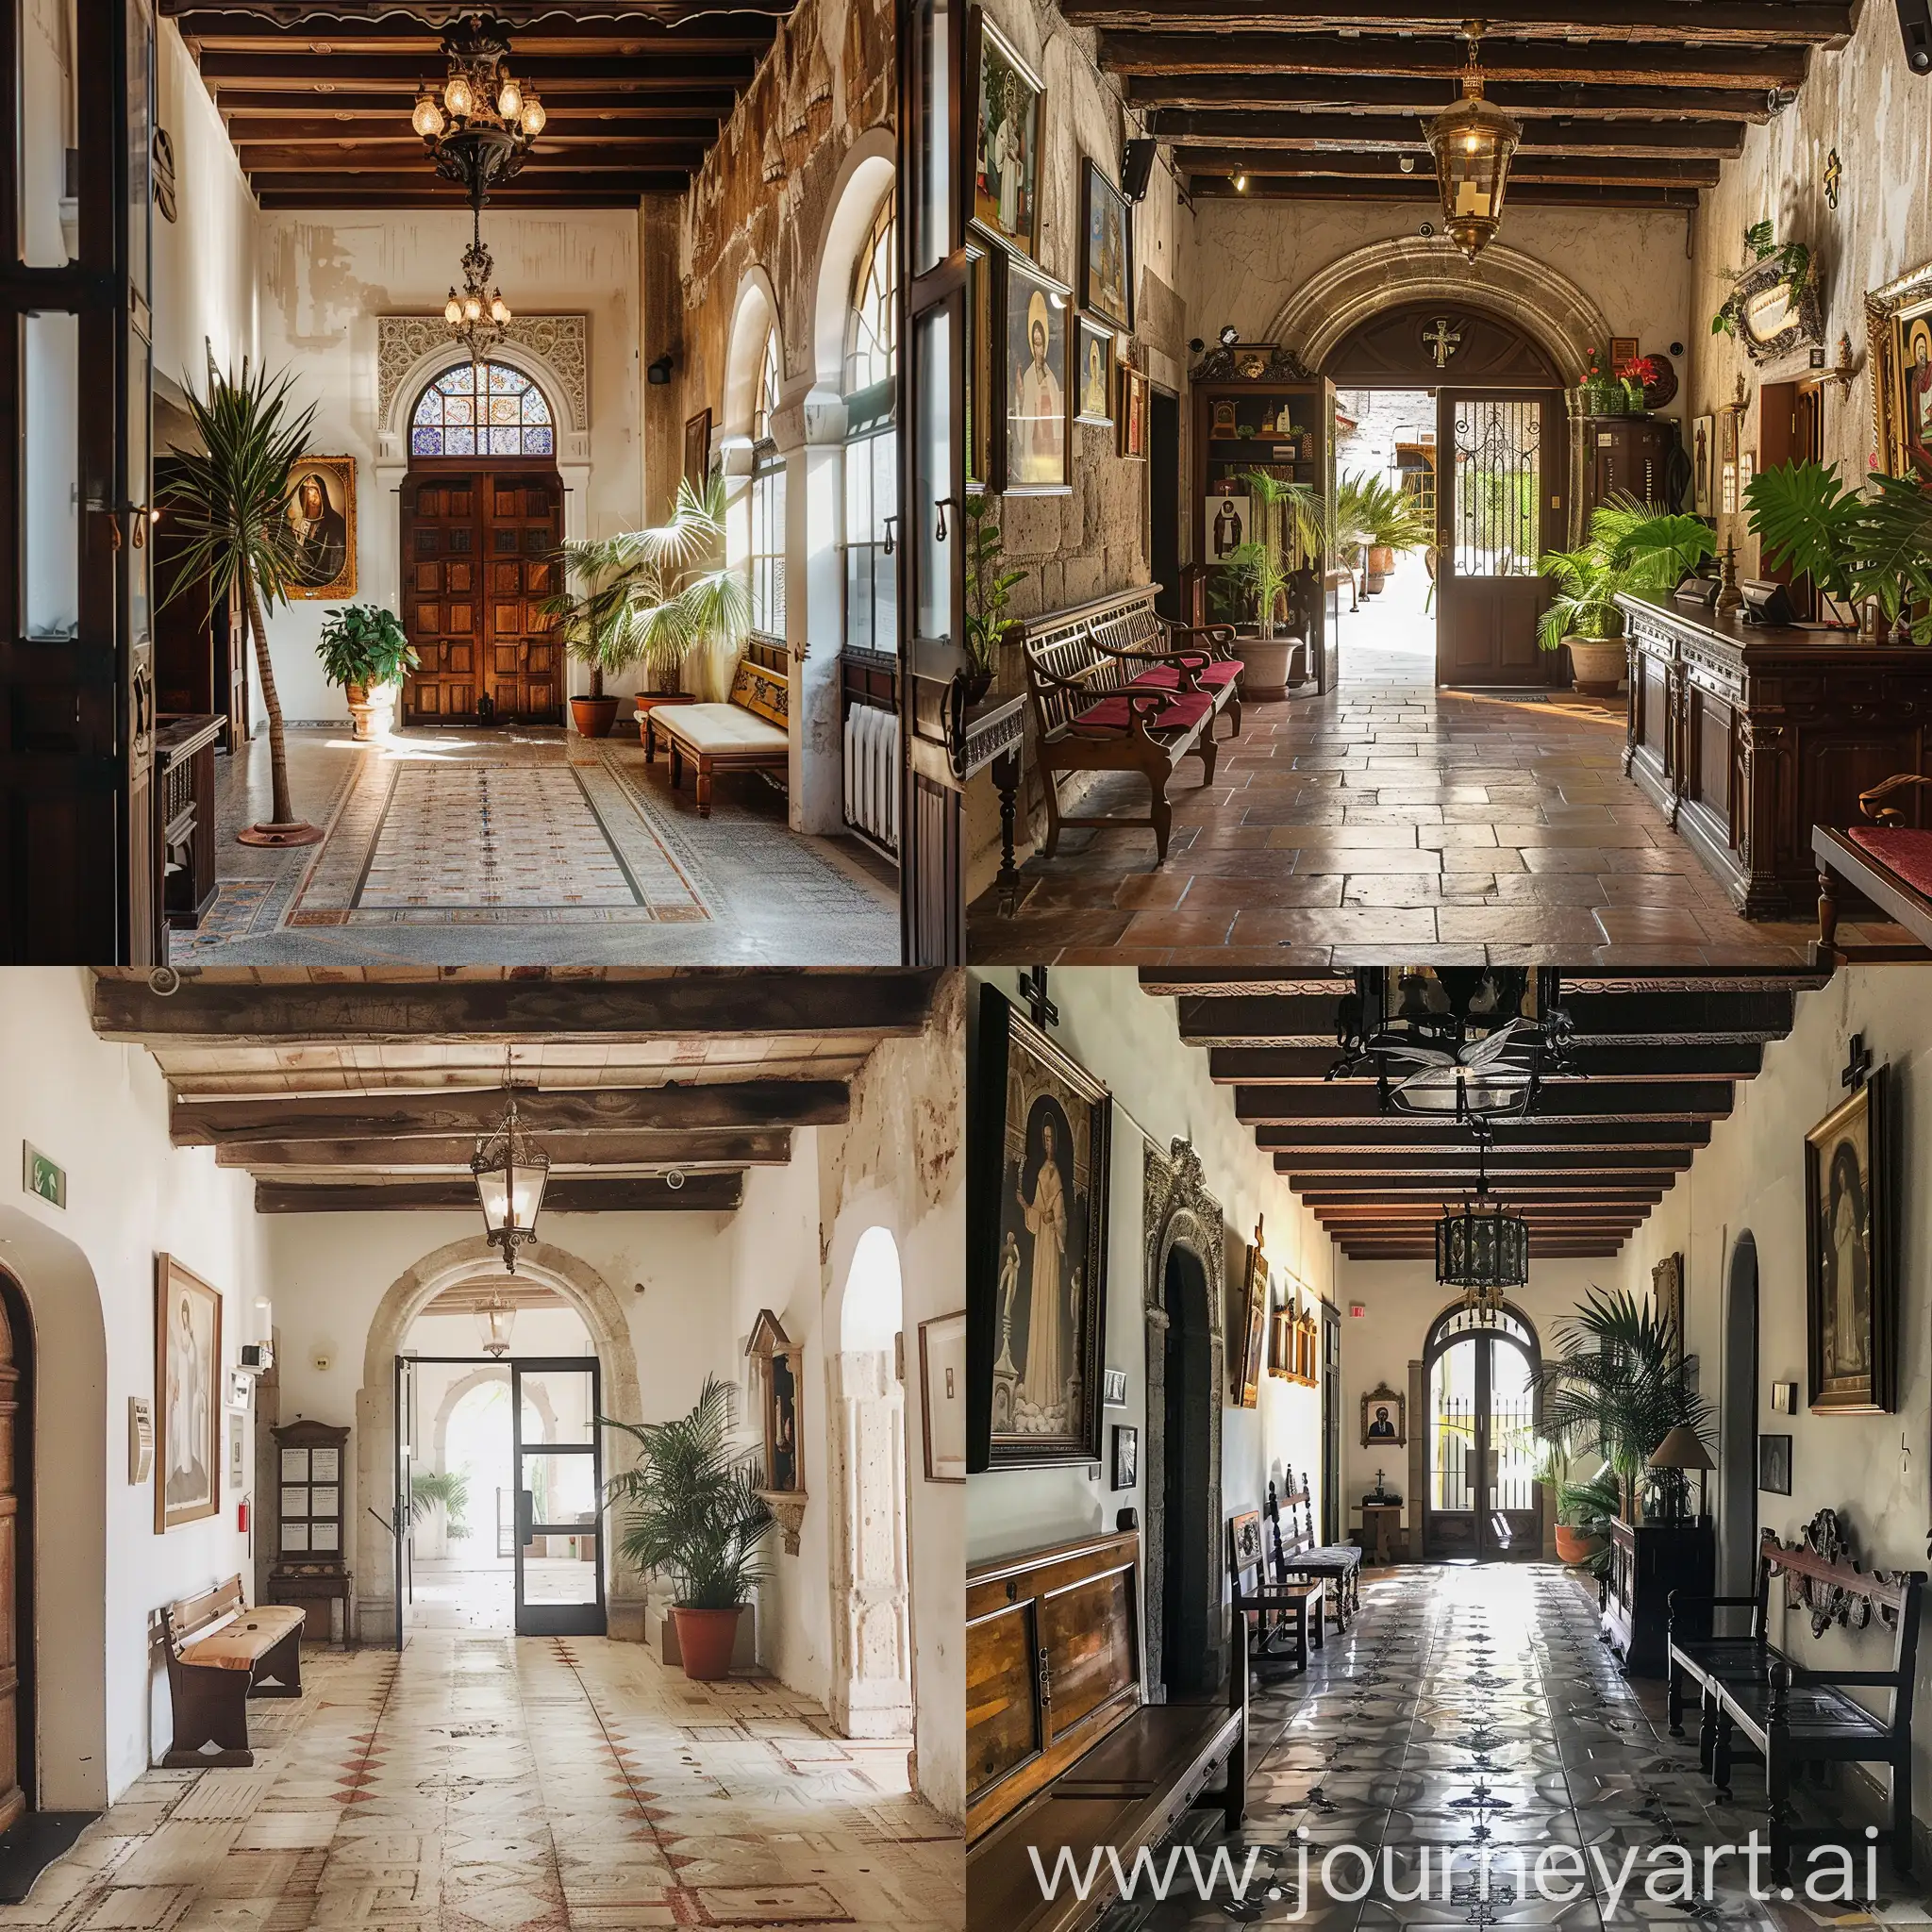 entrance/lobby of modest vintage Spanish and religious hotel
